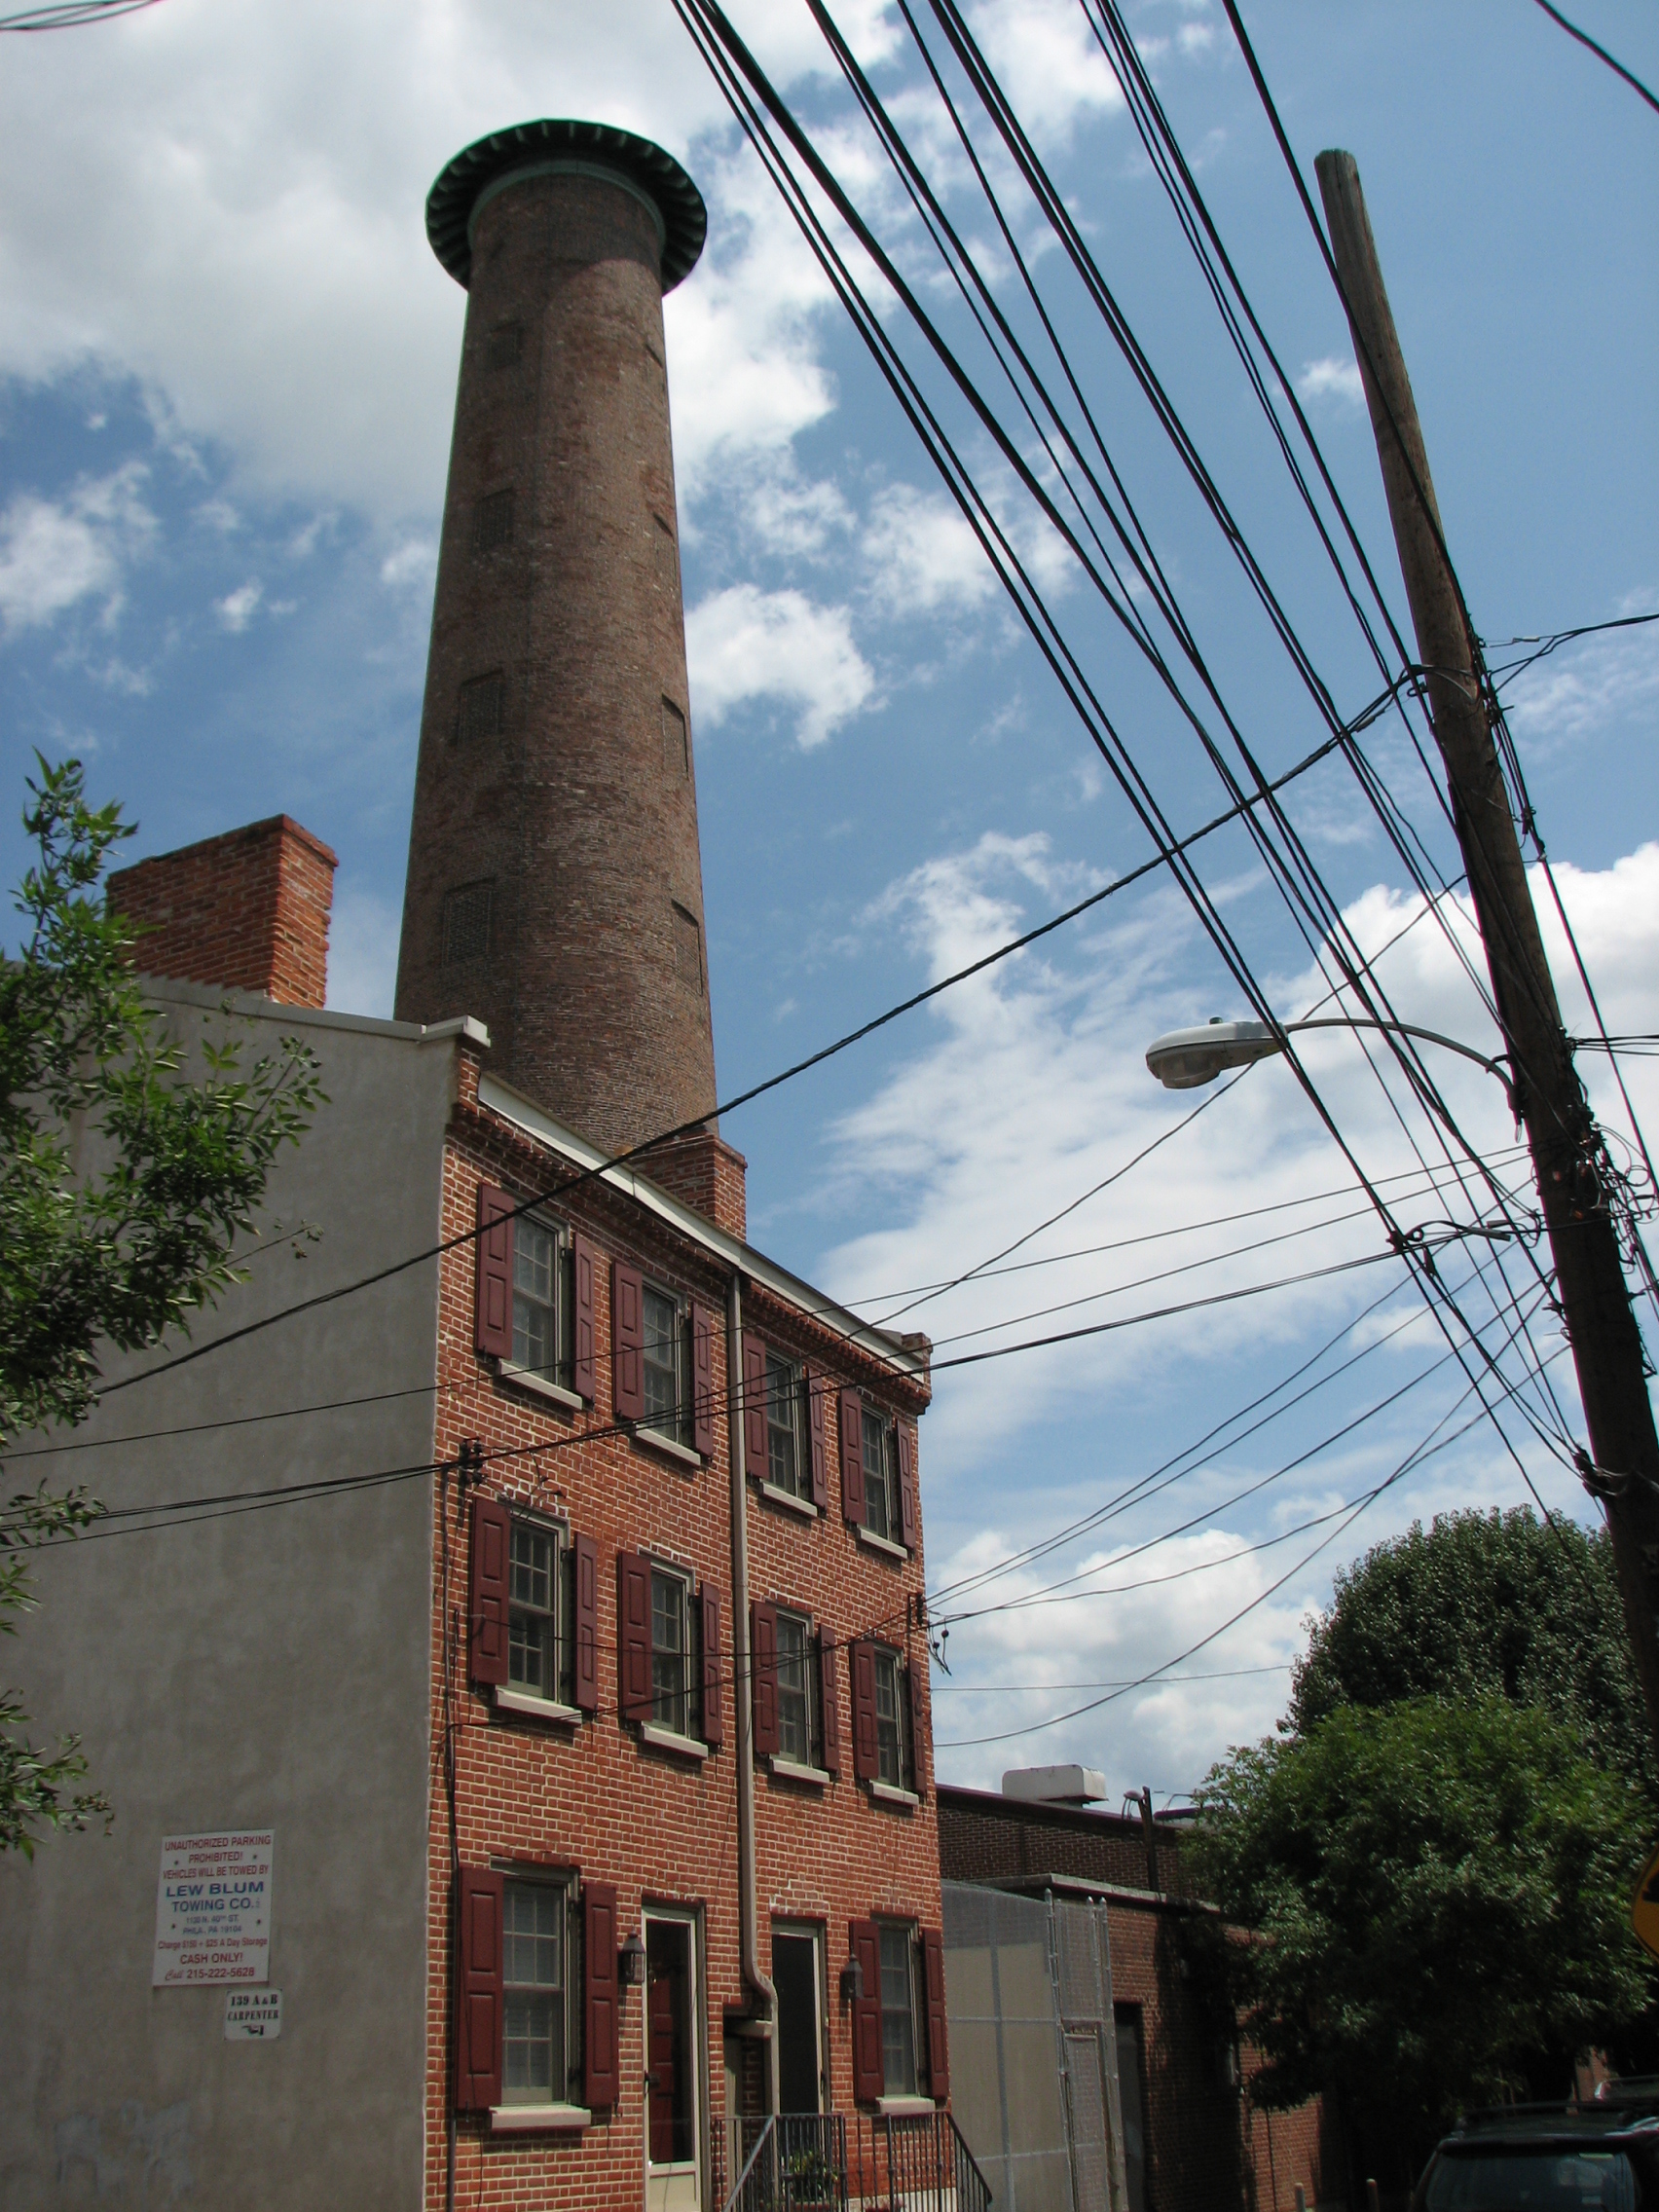 The Sparks Shot Tower looks down on 19th century homes and 20th century wiring on narrow Carpenter Street.